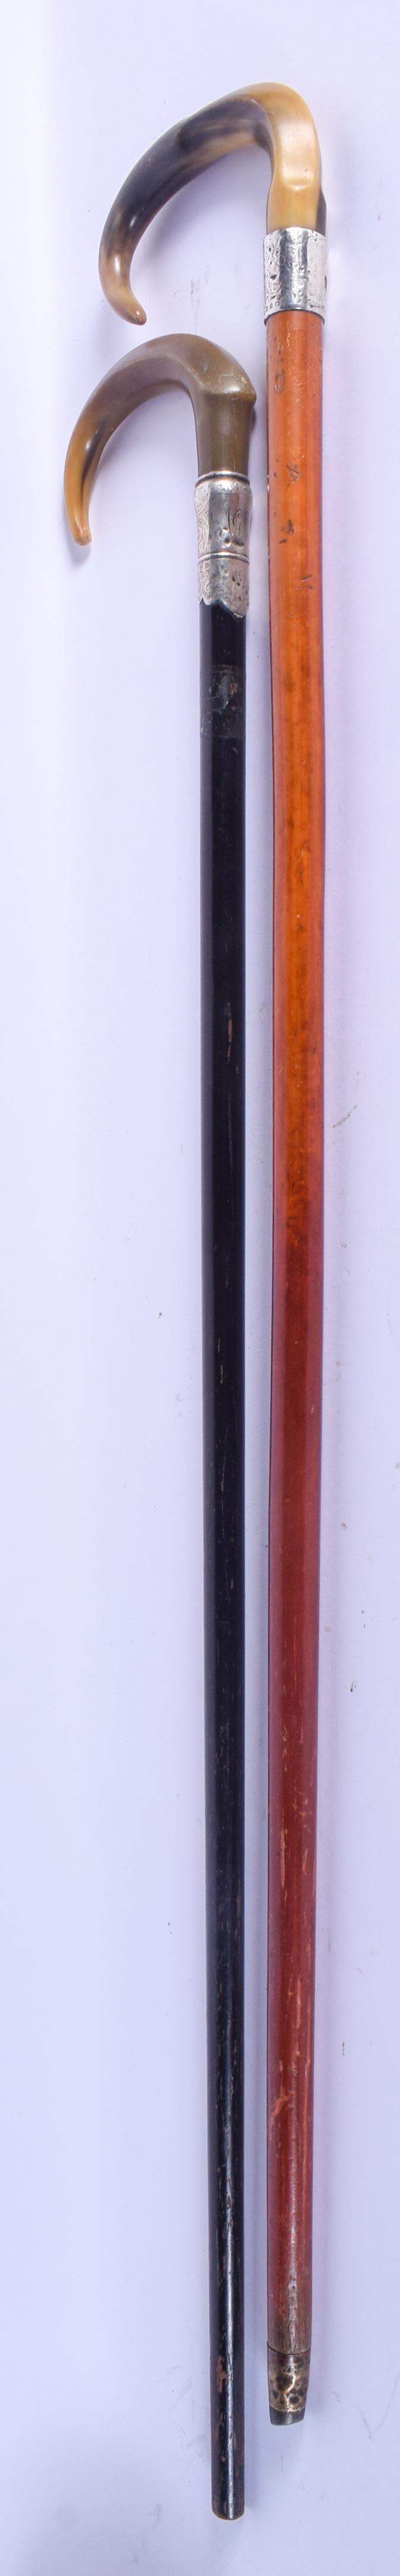 TWO 19TH CENTURY BUFFALO HORN HANDLED WALKING CANES. 88 cm long. (2) - Image 5 of 5